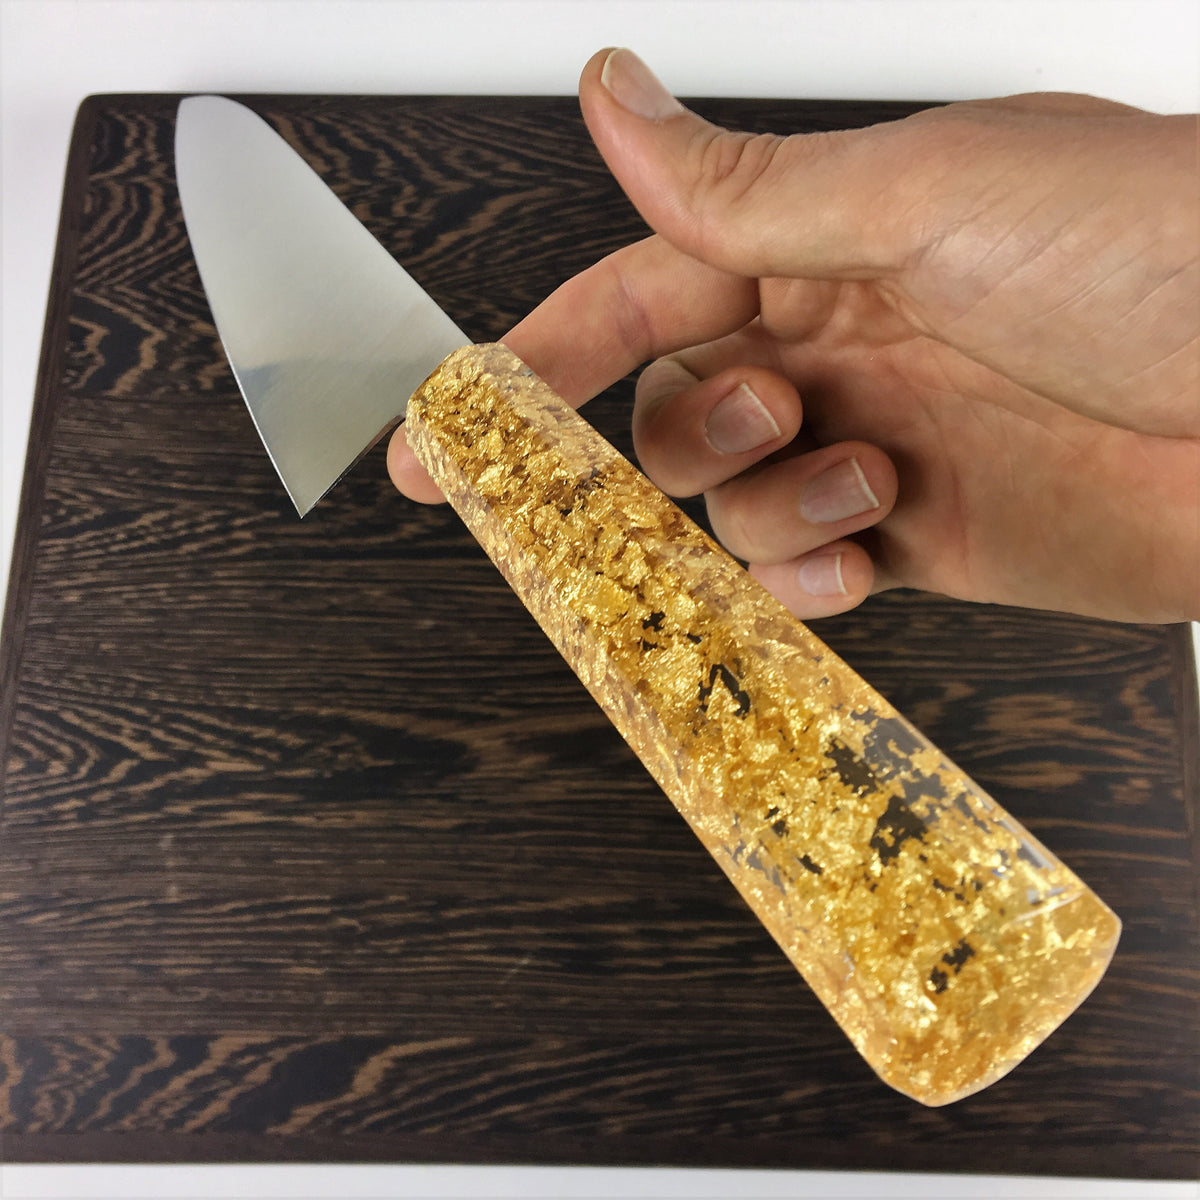 Goldfinger - 210mm (8.25in) Gyuto Chef Knife